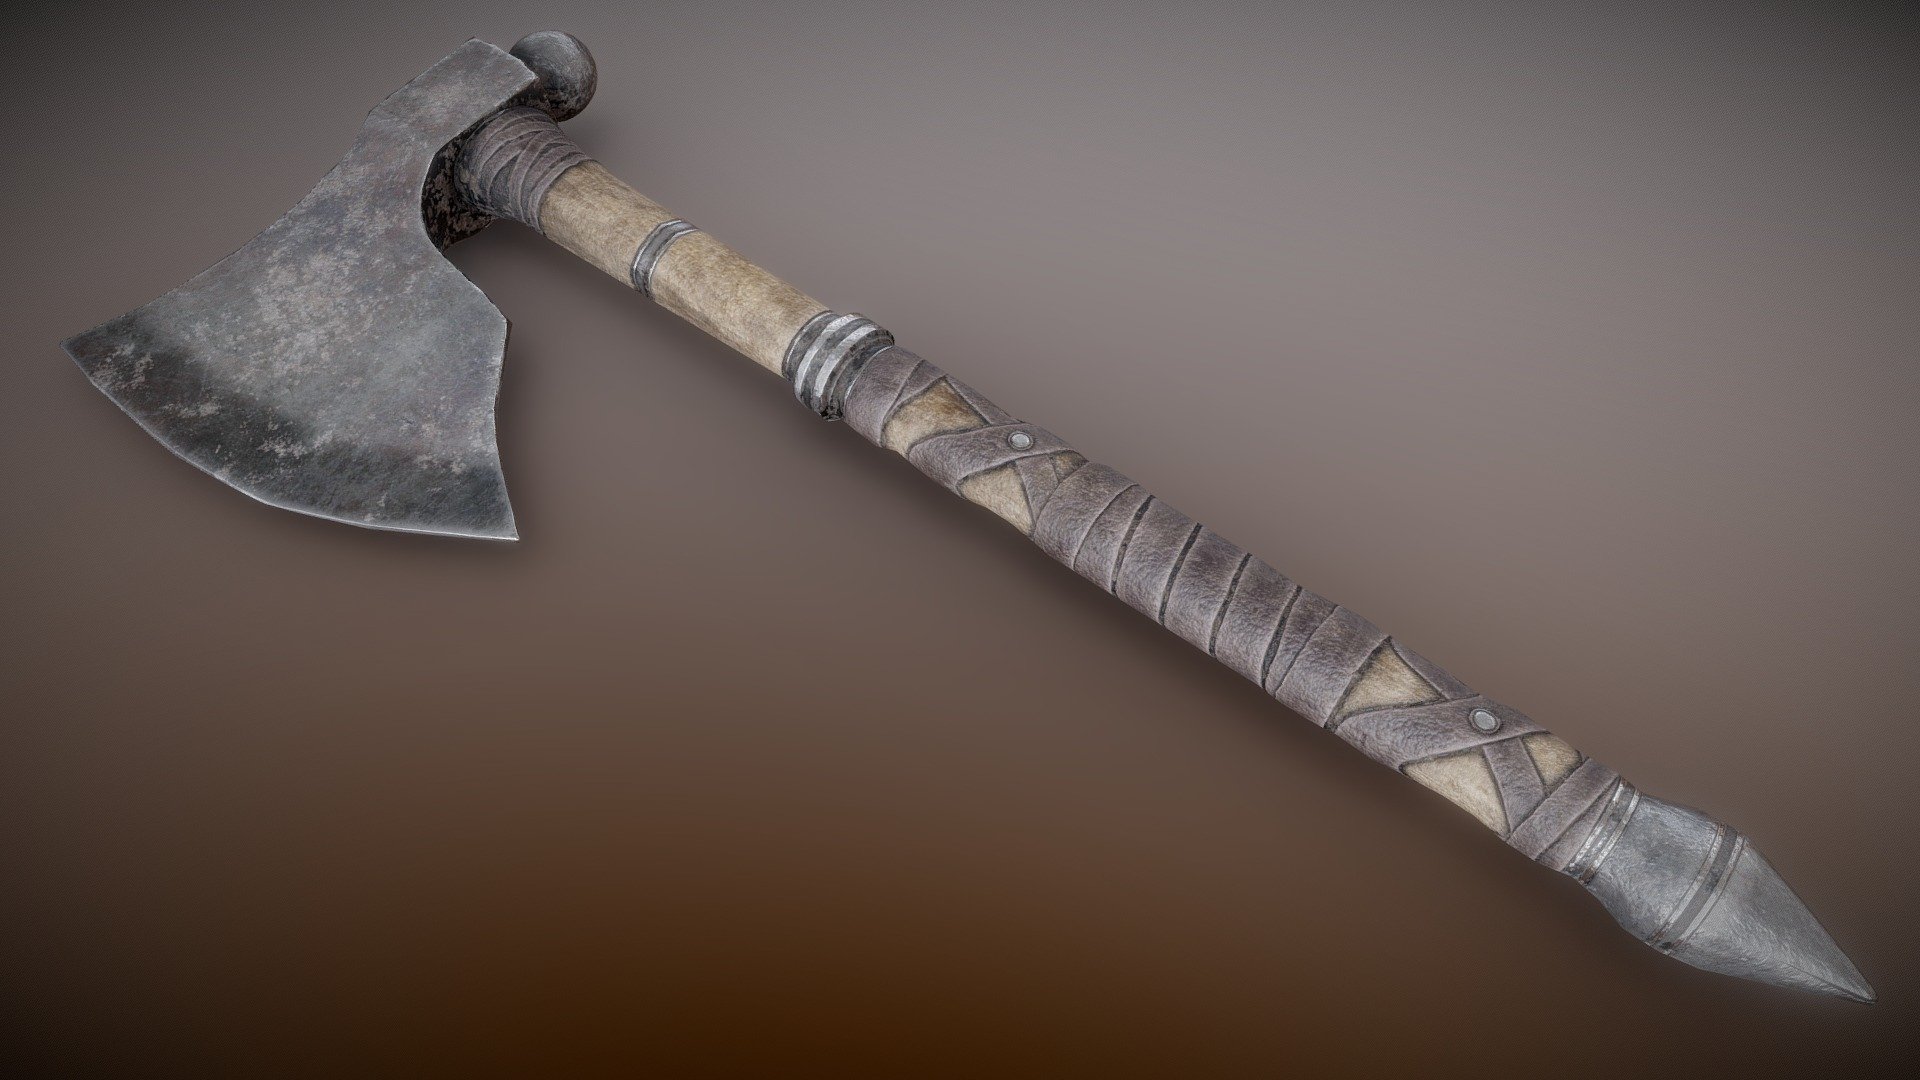 It's Varins Axe! from Assassins Creed Valhalla!

I've already turned this into a mod for the VR game Blade &amp; Sorcery 3d model